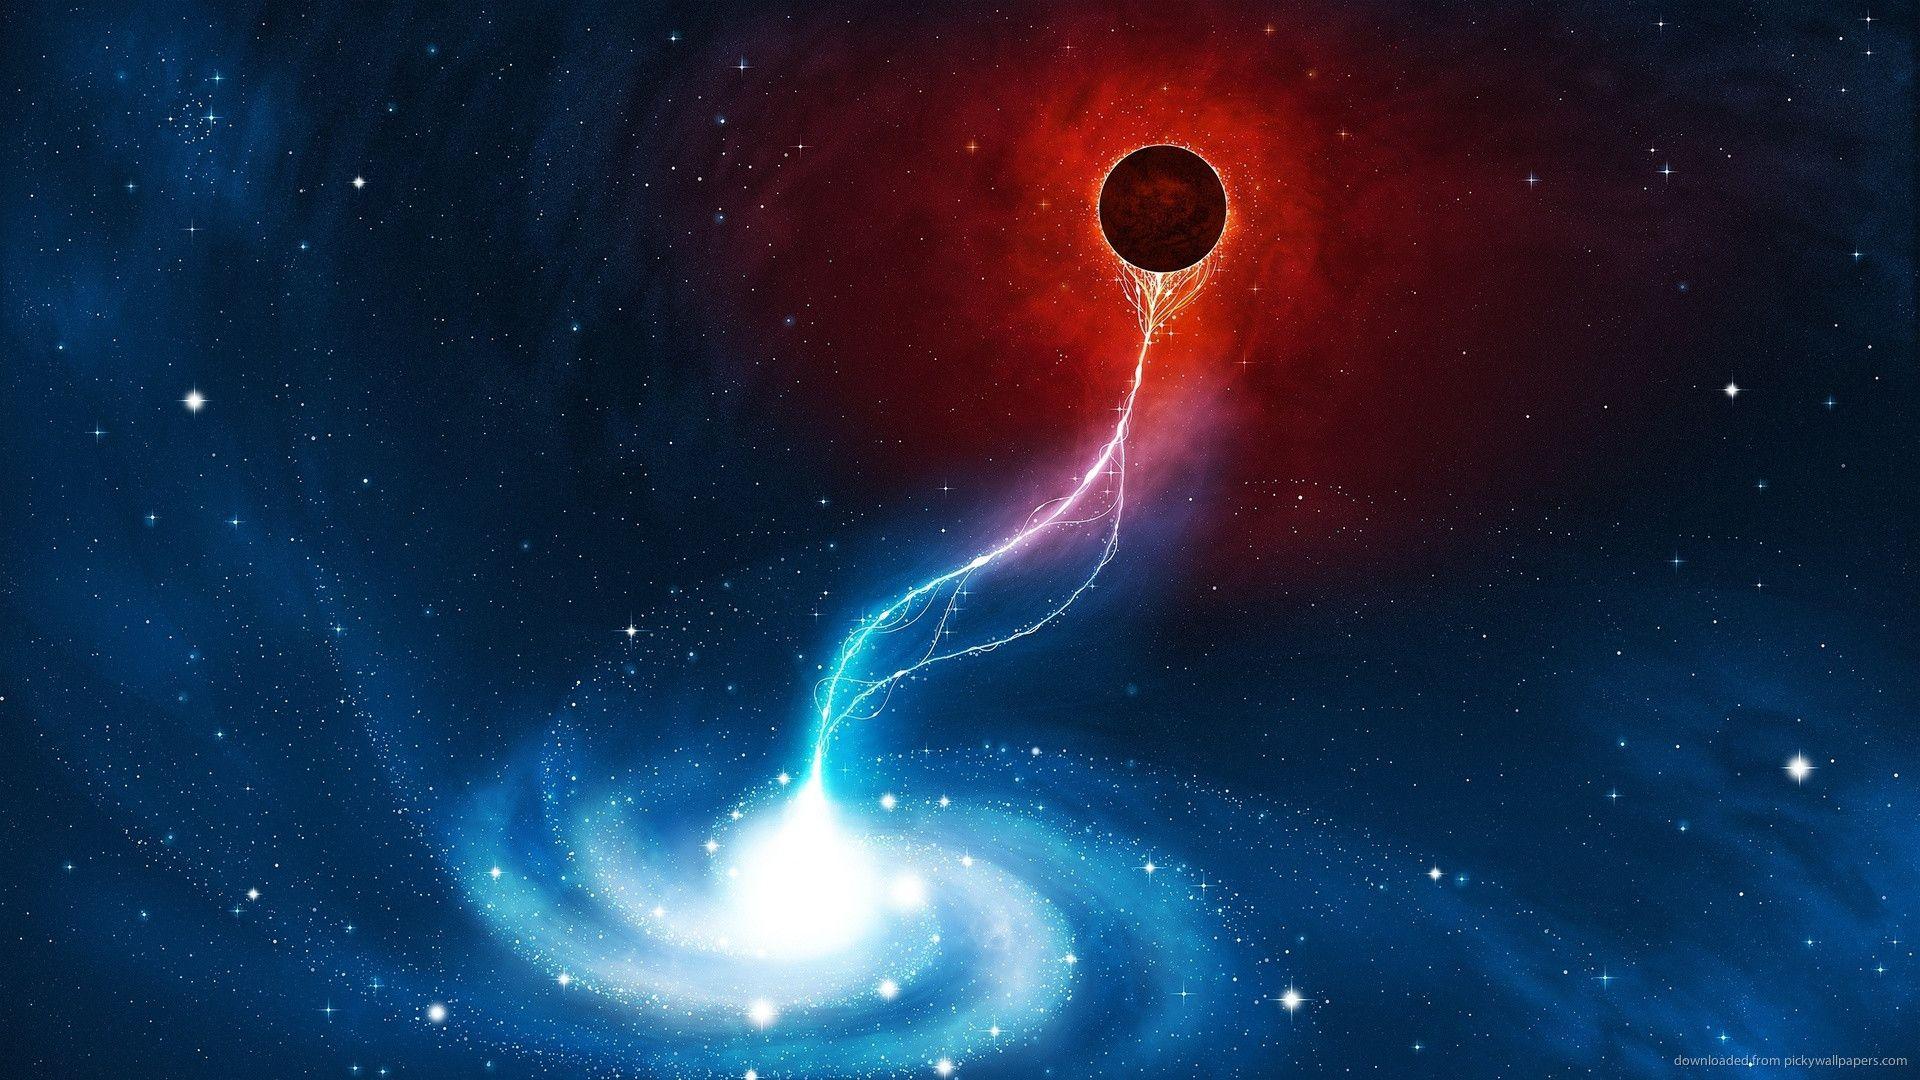 Black Hole Wallpapers: Space Black Hole Wallpapers